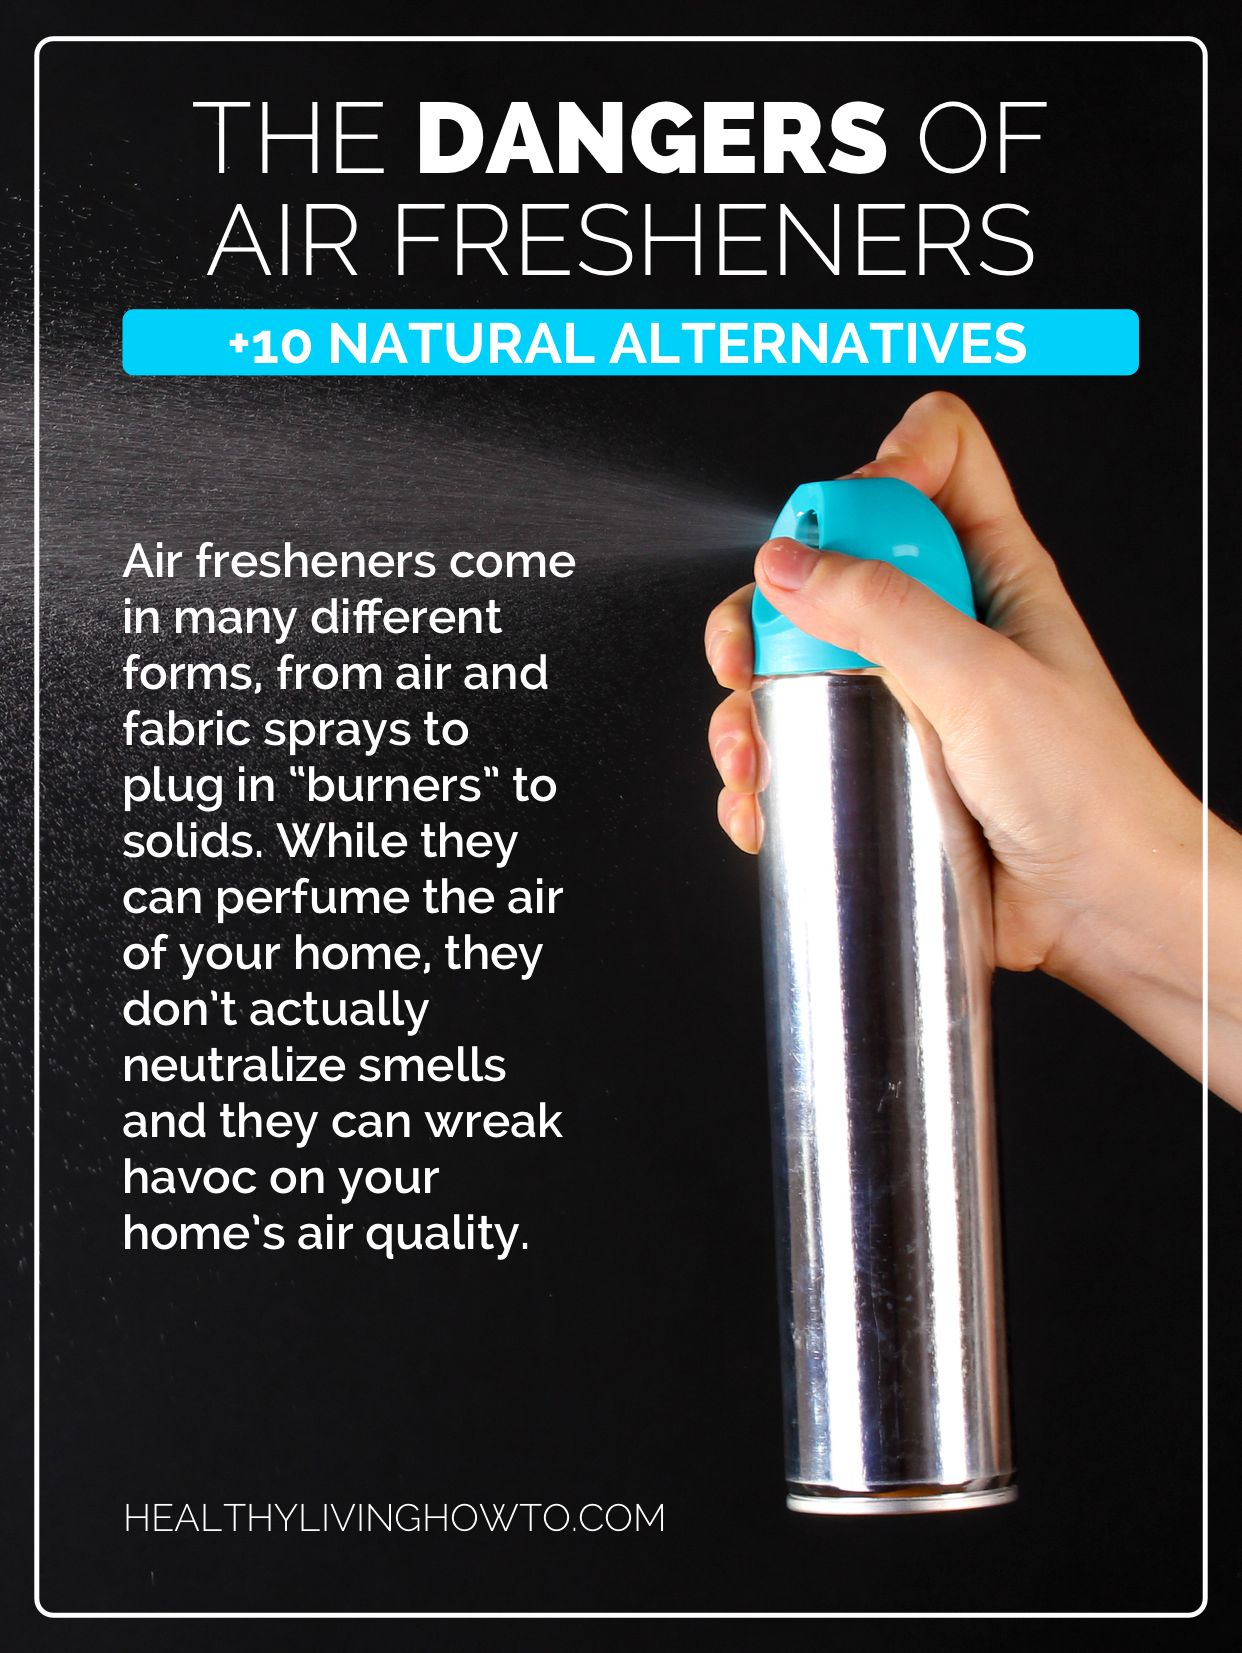 Air Fresheners: Are They Safe?